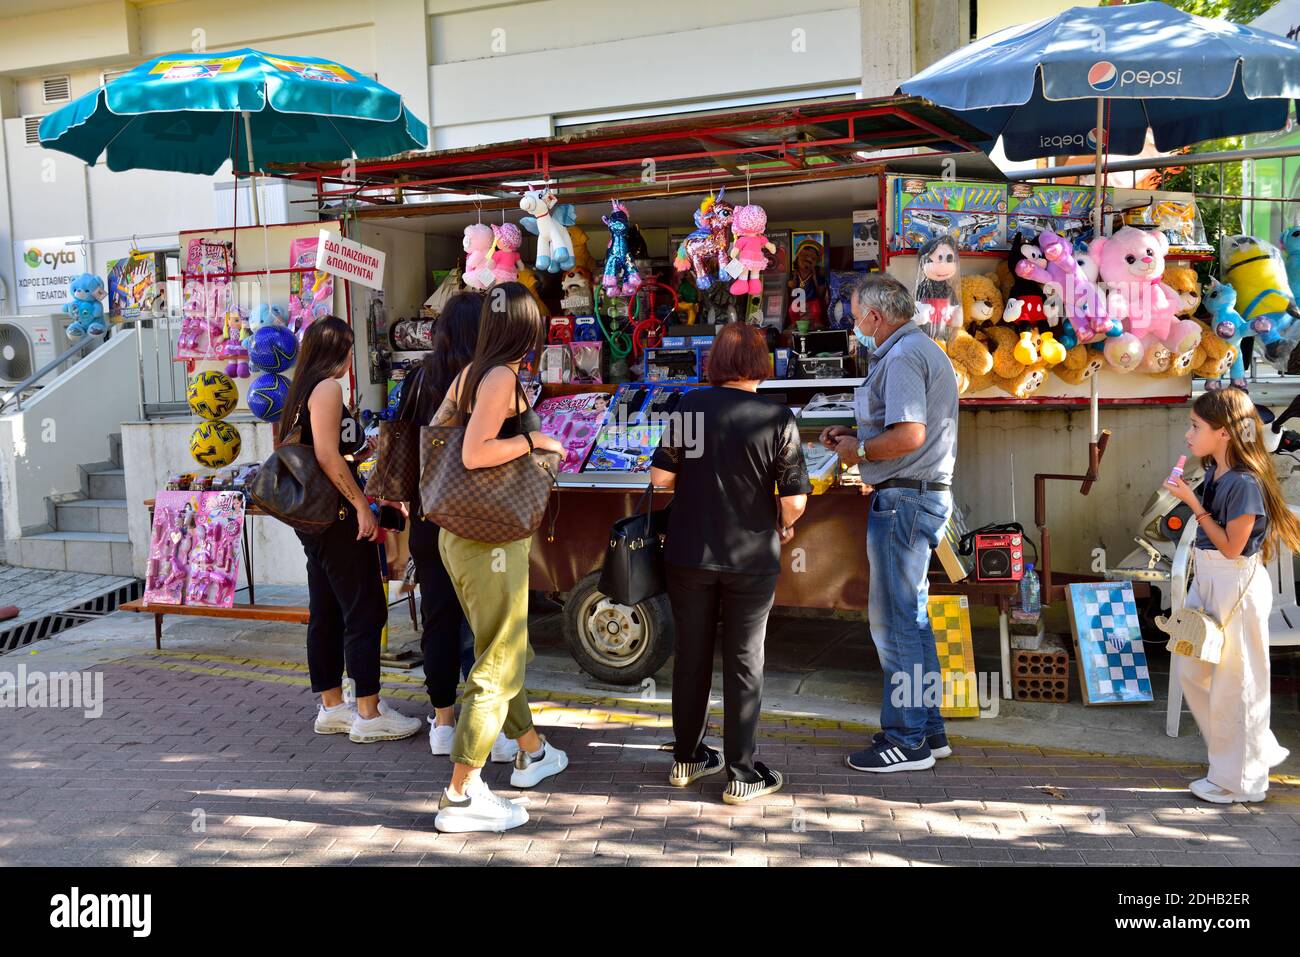 Street vendor selling toys and games in tourist town Stock Photo